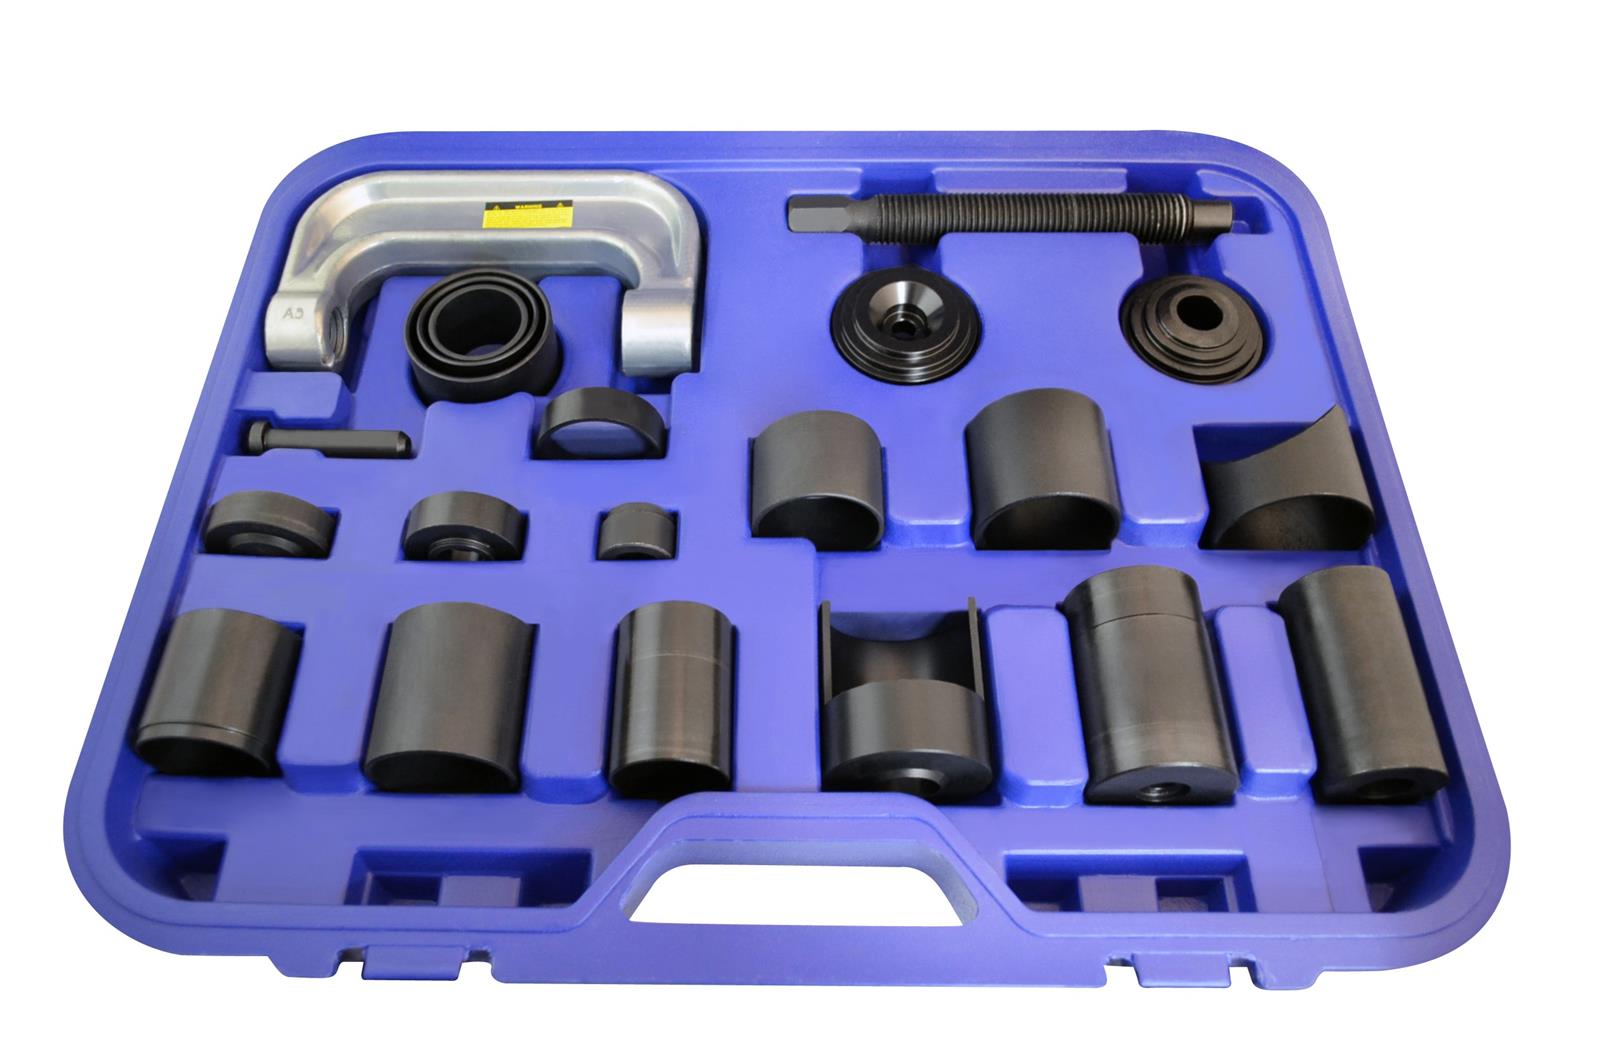 Astro 7897 Ball Joint Service Tool Kit and Master Adapter Set